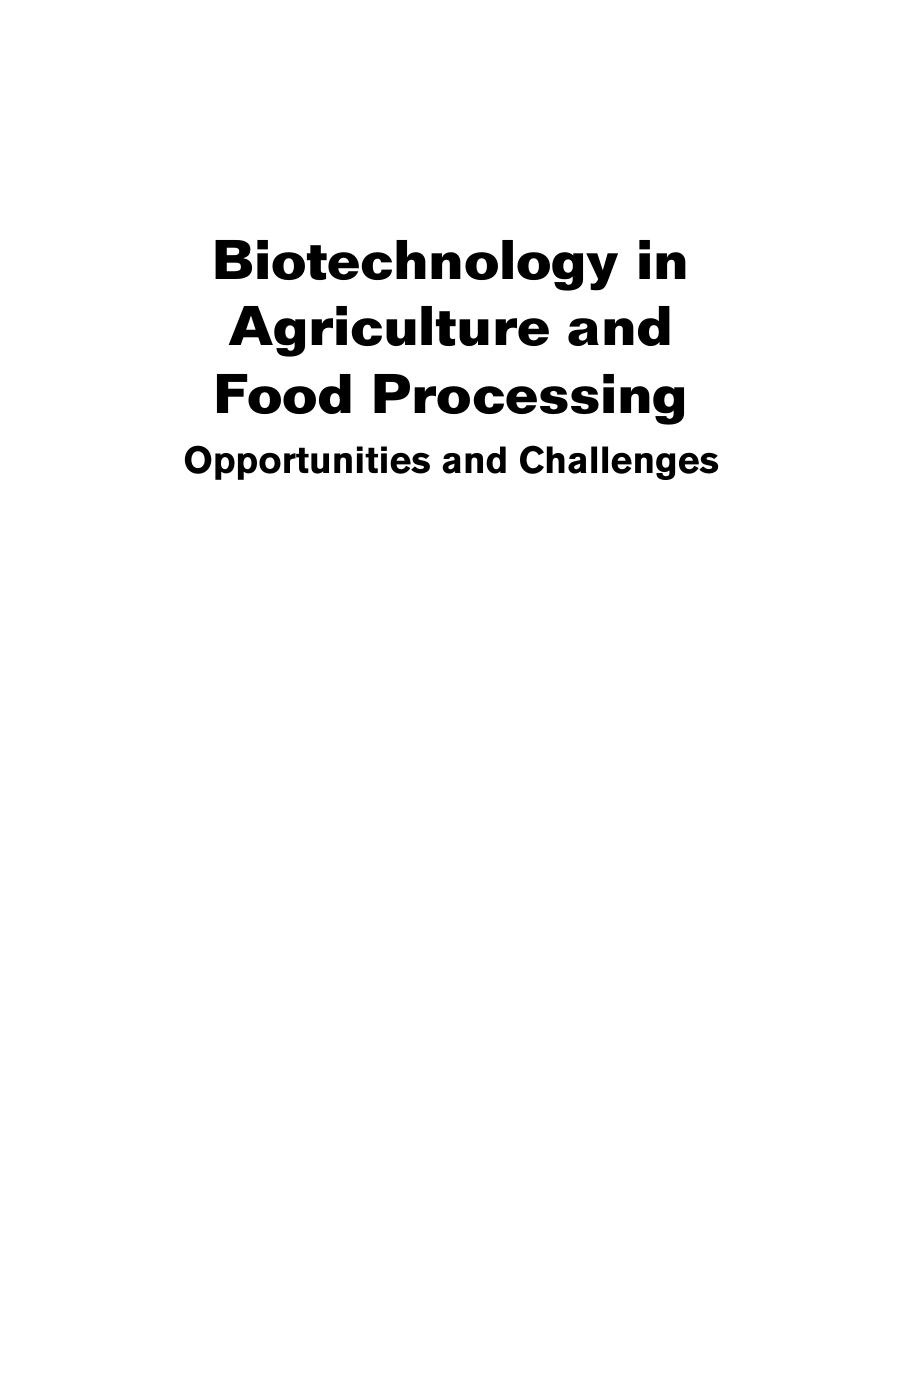 Biotechnology in Agriculture and Food Processing  Opportunities and Challenges2014